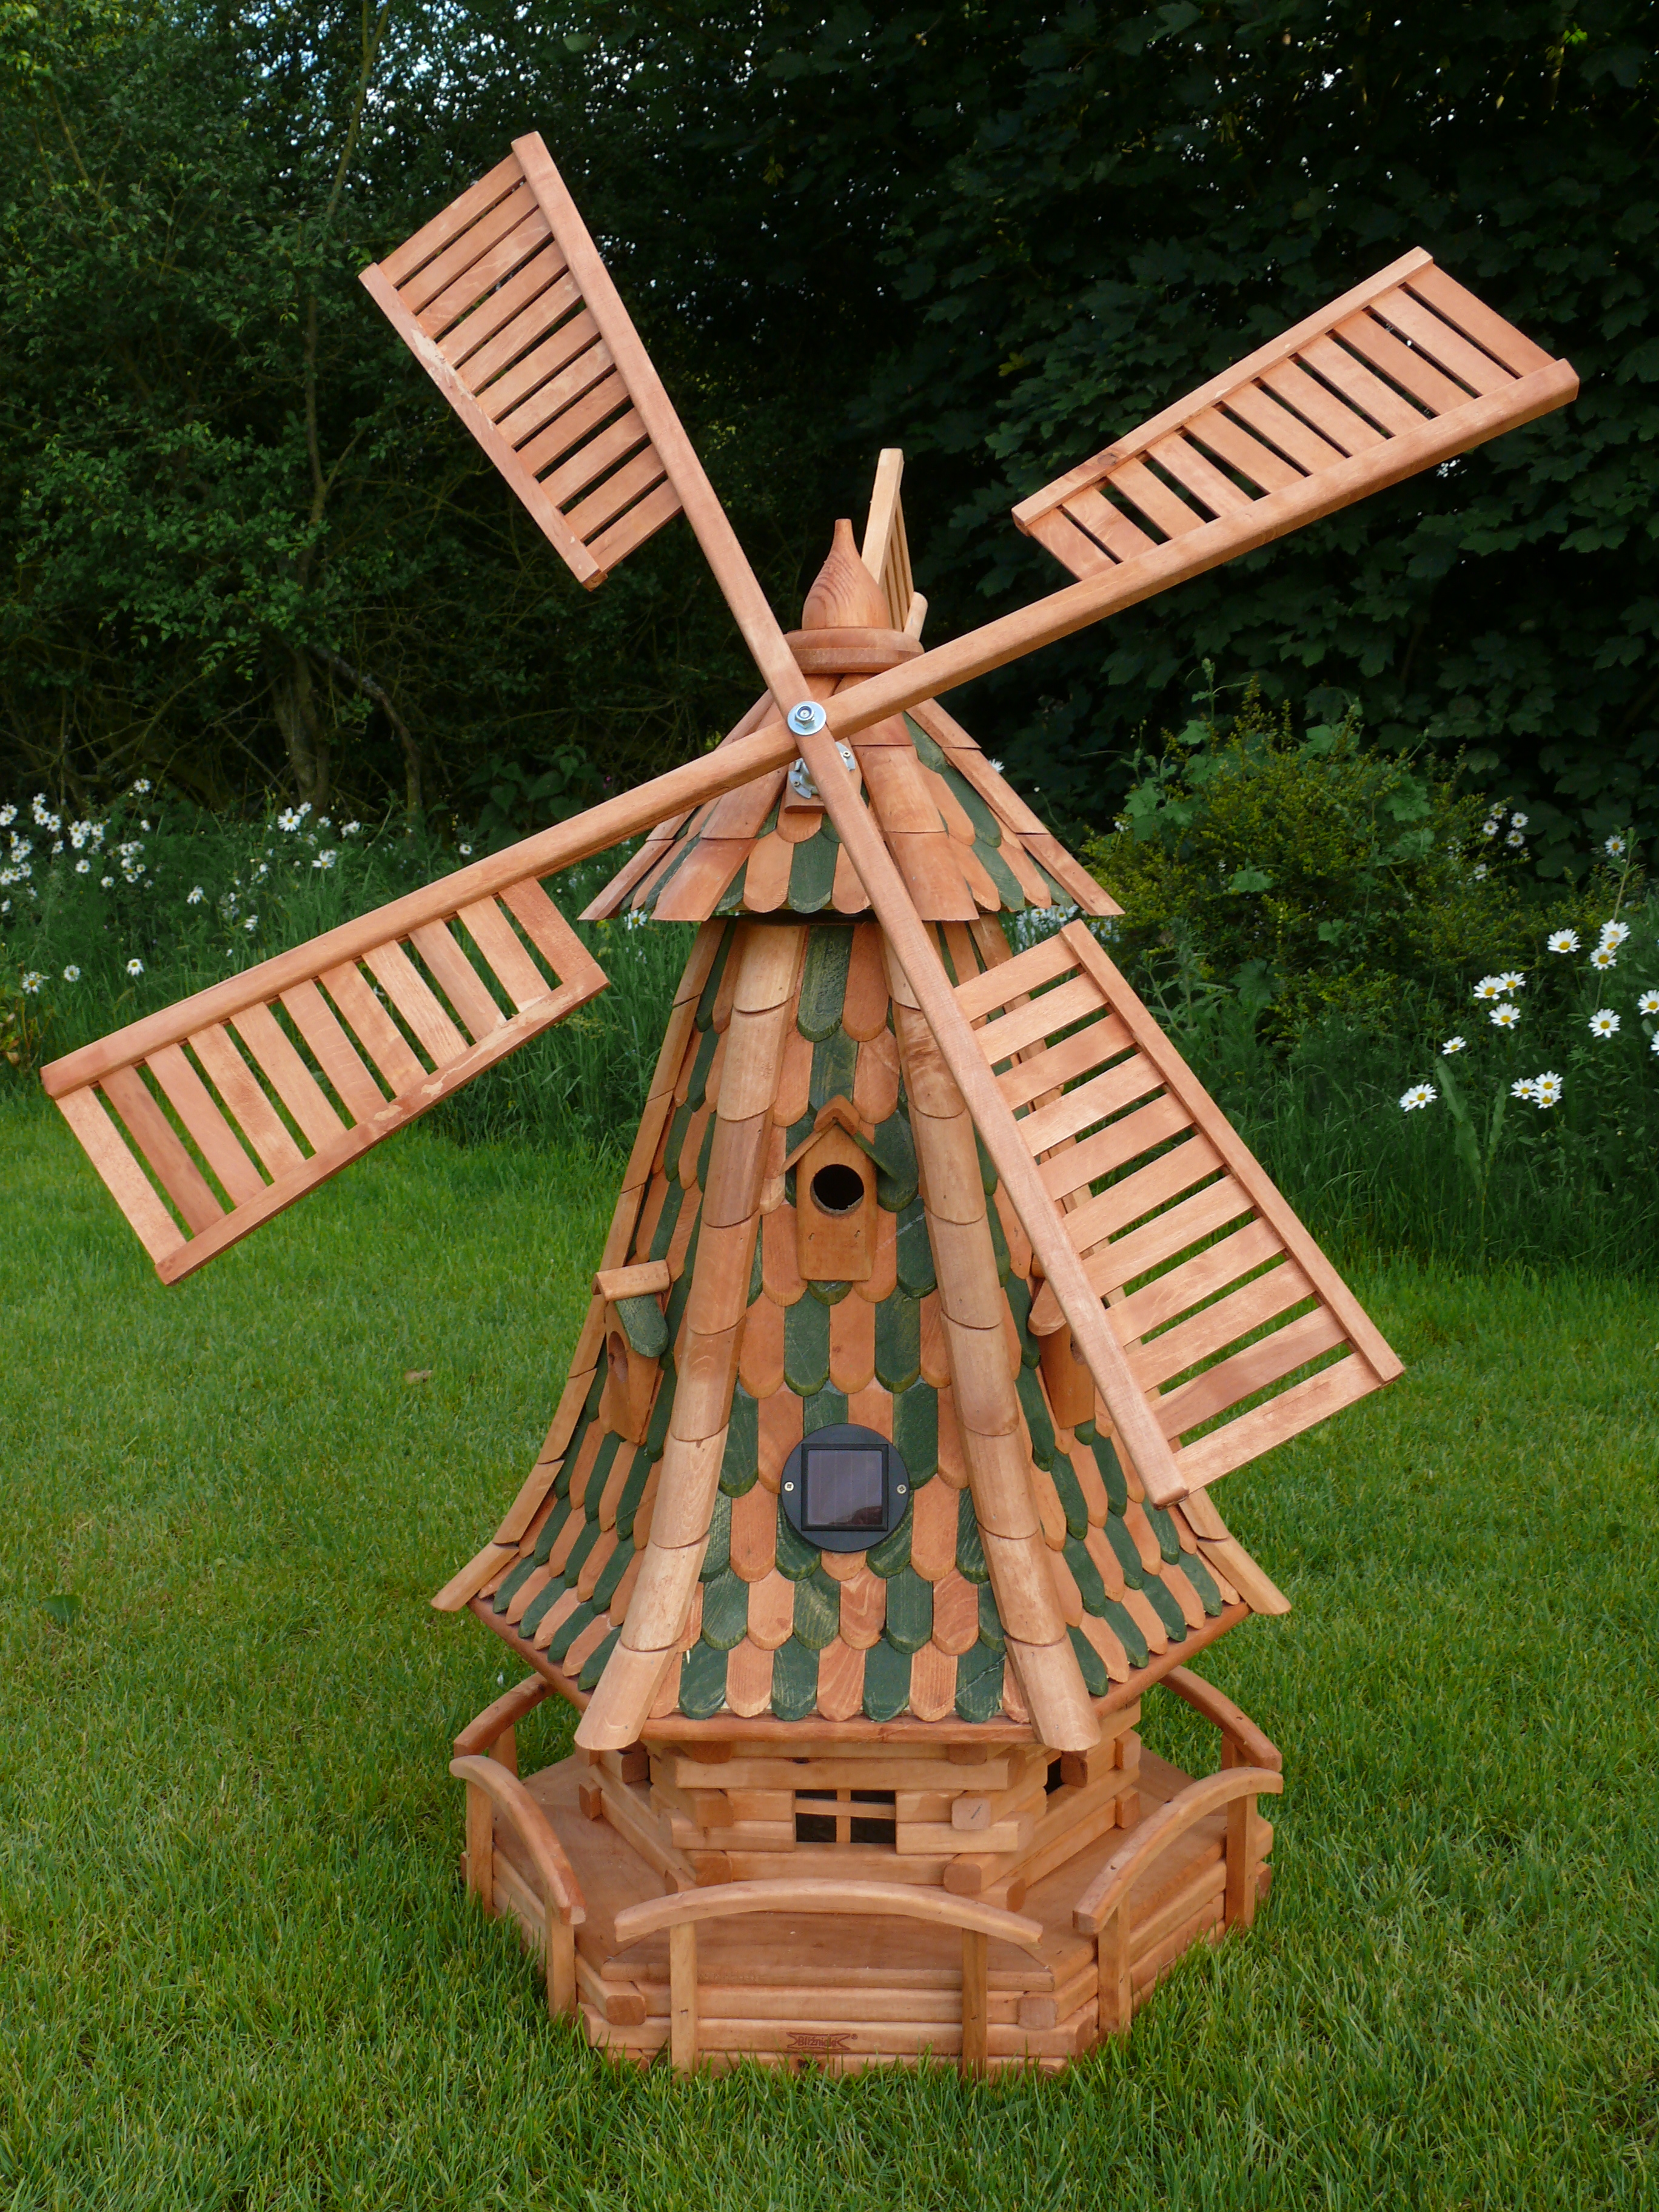 Adding a Garden windmill can make more Decorative Impact to your ...